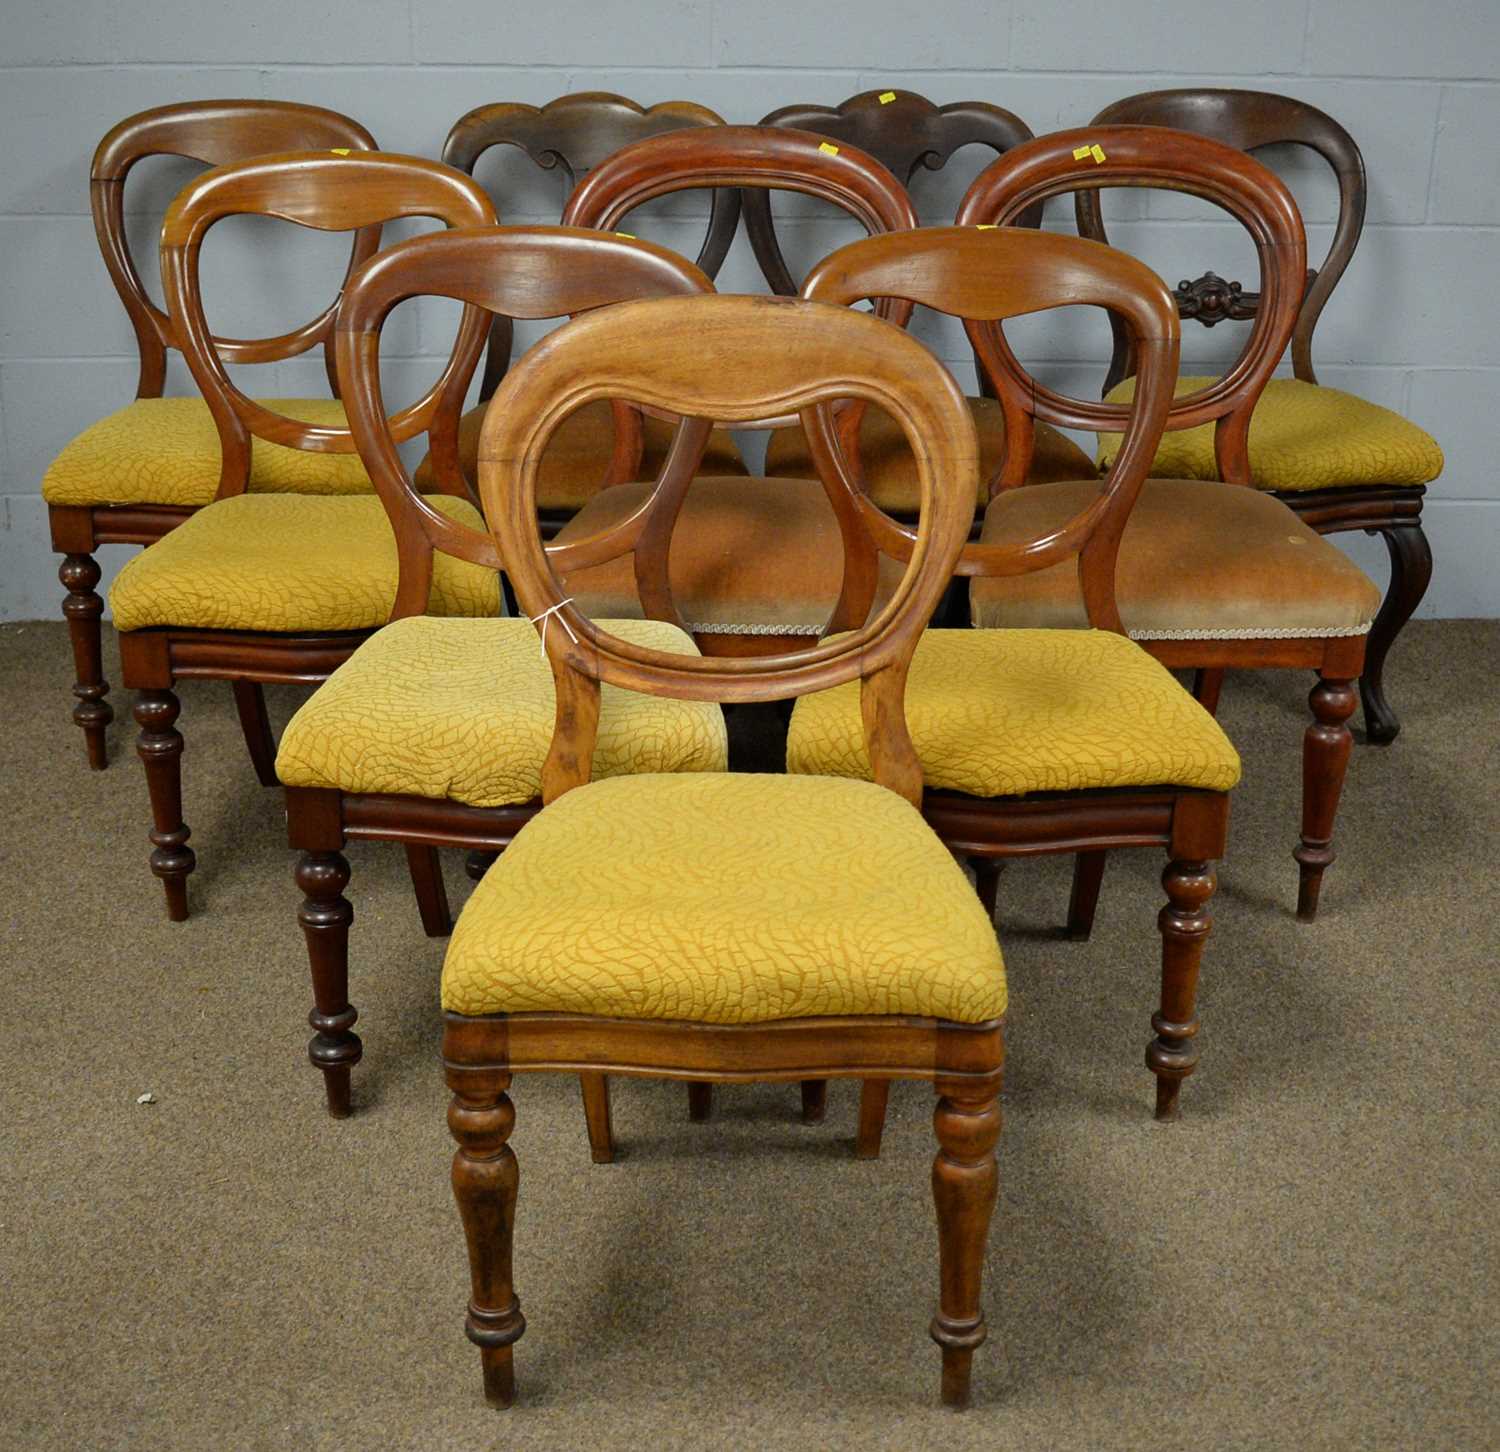 Lot 23 - A Harlequin set of ten Victorian balloon back chairs